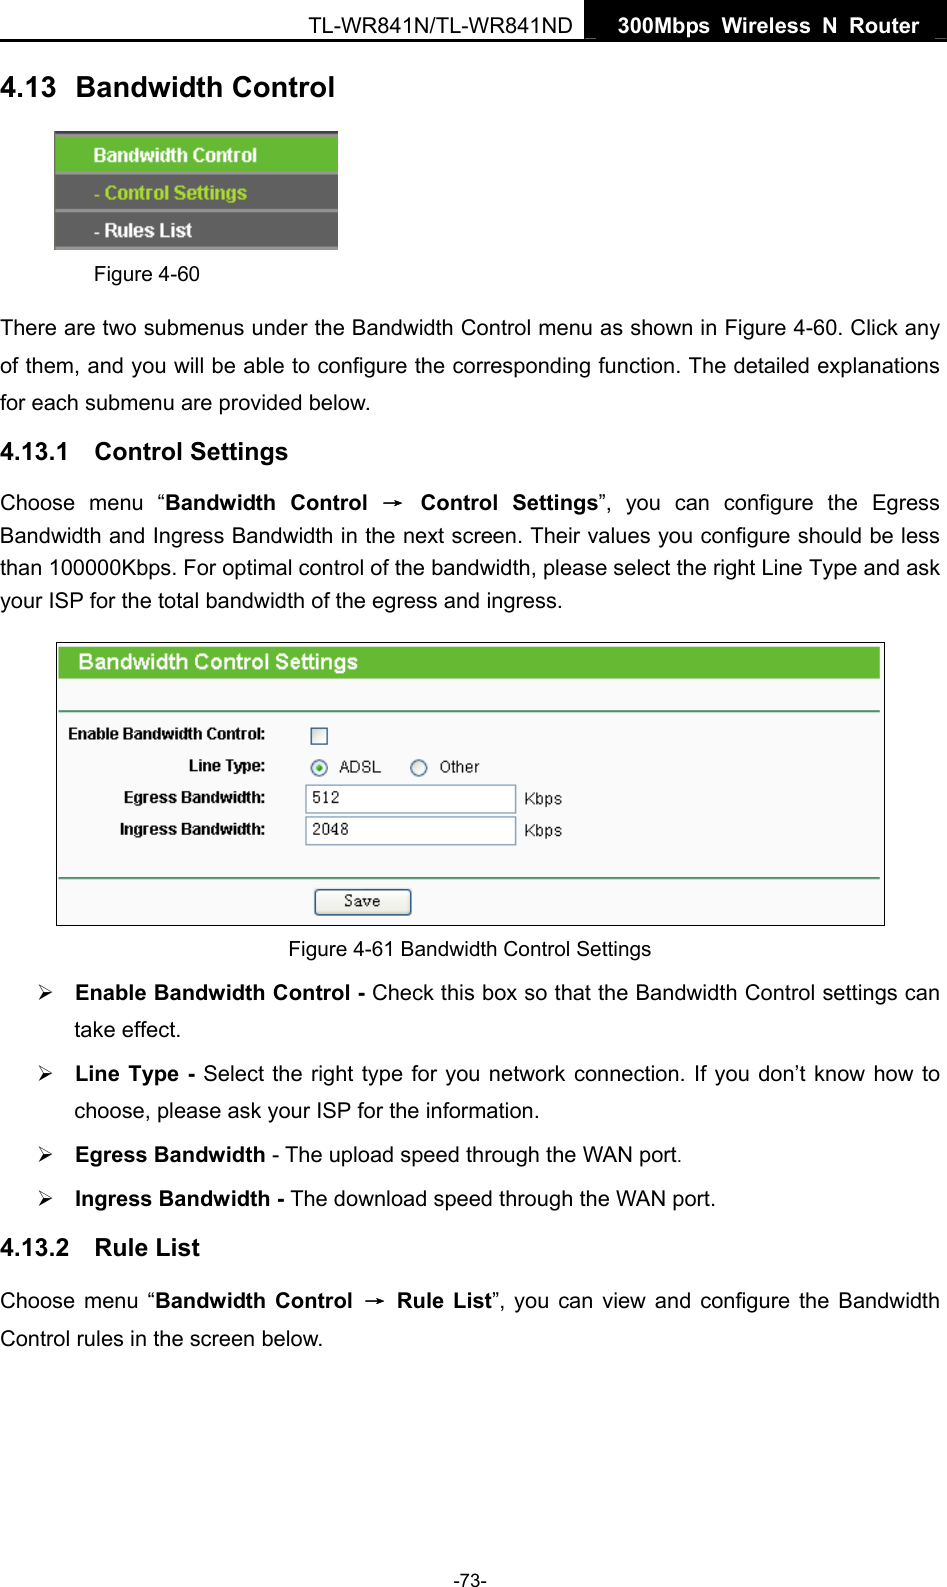   300Mbps Wireless N Router TL-WR841N/TL-WR841ND -73- 4.13  Bandwidth Control  Figure 4-60 There are two submenus under the Bandwidth Control menu as shown in Figure 4-60. Click any of them, and you will be able to configure the corresponding function. The detailed explanations for each submenu are provided below. 4.13.1  Control Settings Choose menu “Bandwidth Control → Control Settings”, you can configure the Egress Bandwidth and Ingress Bandwidth in the next screen. Their values you configure should be less than 100000Kbps. For optimal control of the bandwidth, please select the right Line Type and ask your ISP for the total bandwidth of the egress and ingress.  Figure 4-61 Bandwidth Control Settings ¾ Enable Bandwidth Control - Check this box so that the Bandwidth Control settings can take effect. ¾ Line Type - Select the right type for you network connection. If you don’t know how to choose, please ask your ISP for the information. ¾ Egress Bandwidth - The upload speed through the WAN port. ¾ Ingress Bandwidth - The download speed through the WAN port. 4.13.2  Rule List Choose menu “Bandwidth Control → Rule List”, you can view and configure the Bandwidth Control rules in the screen below. 